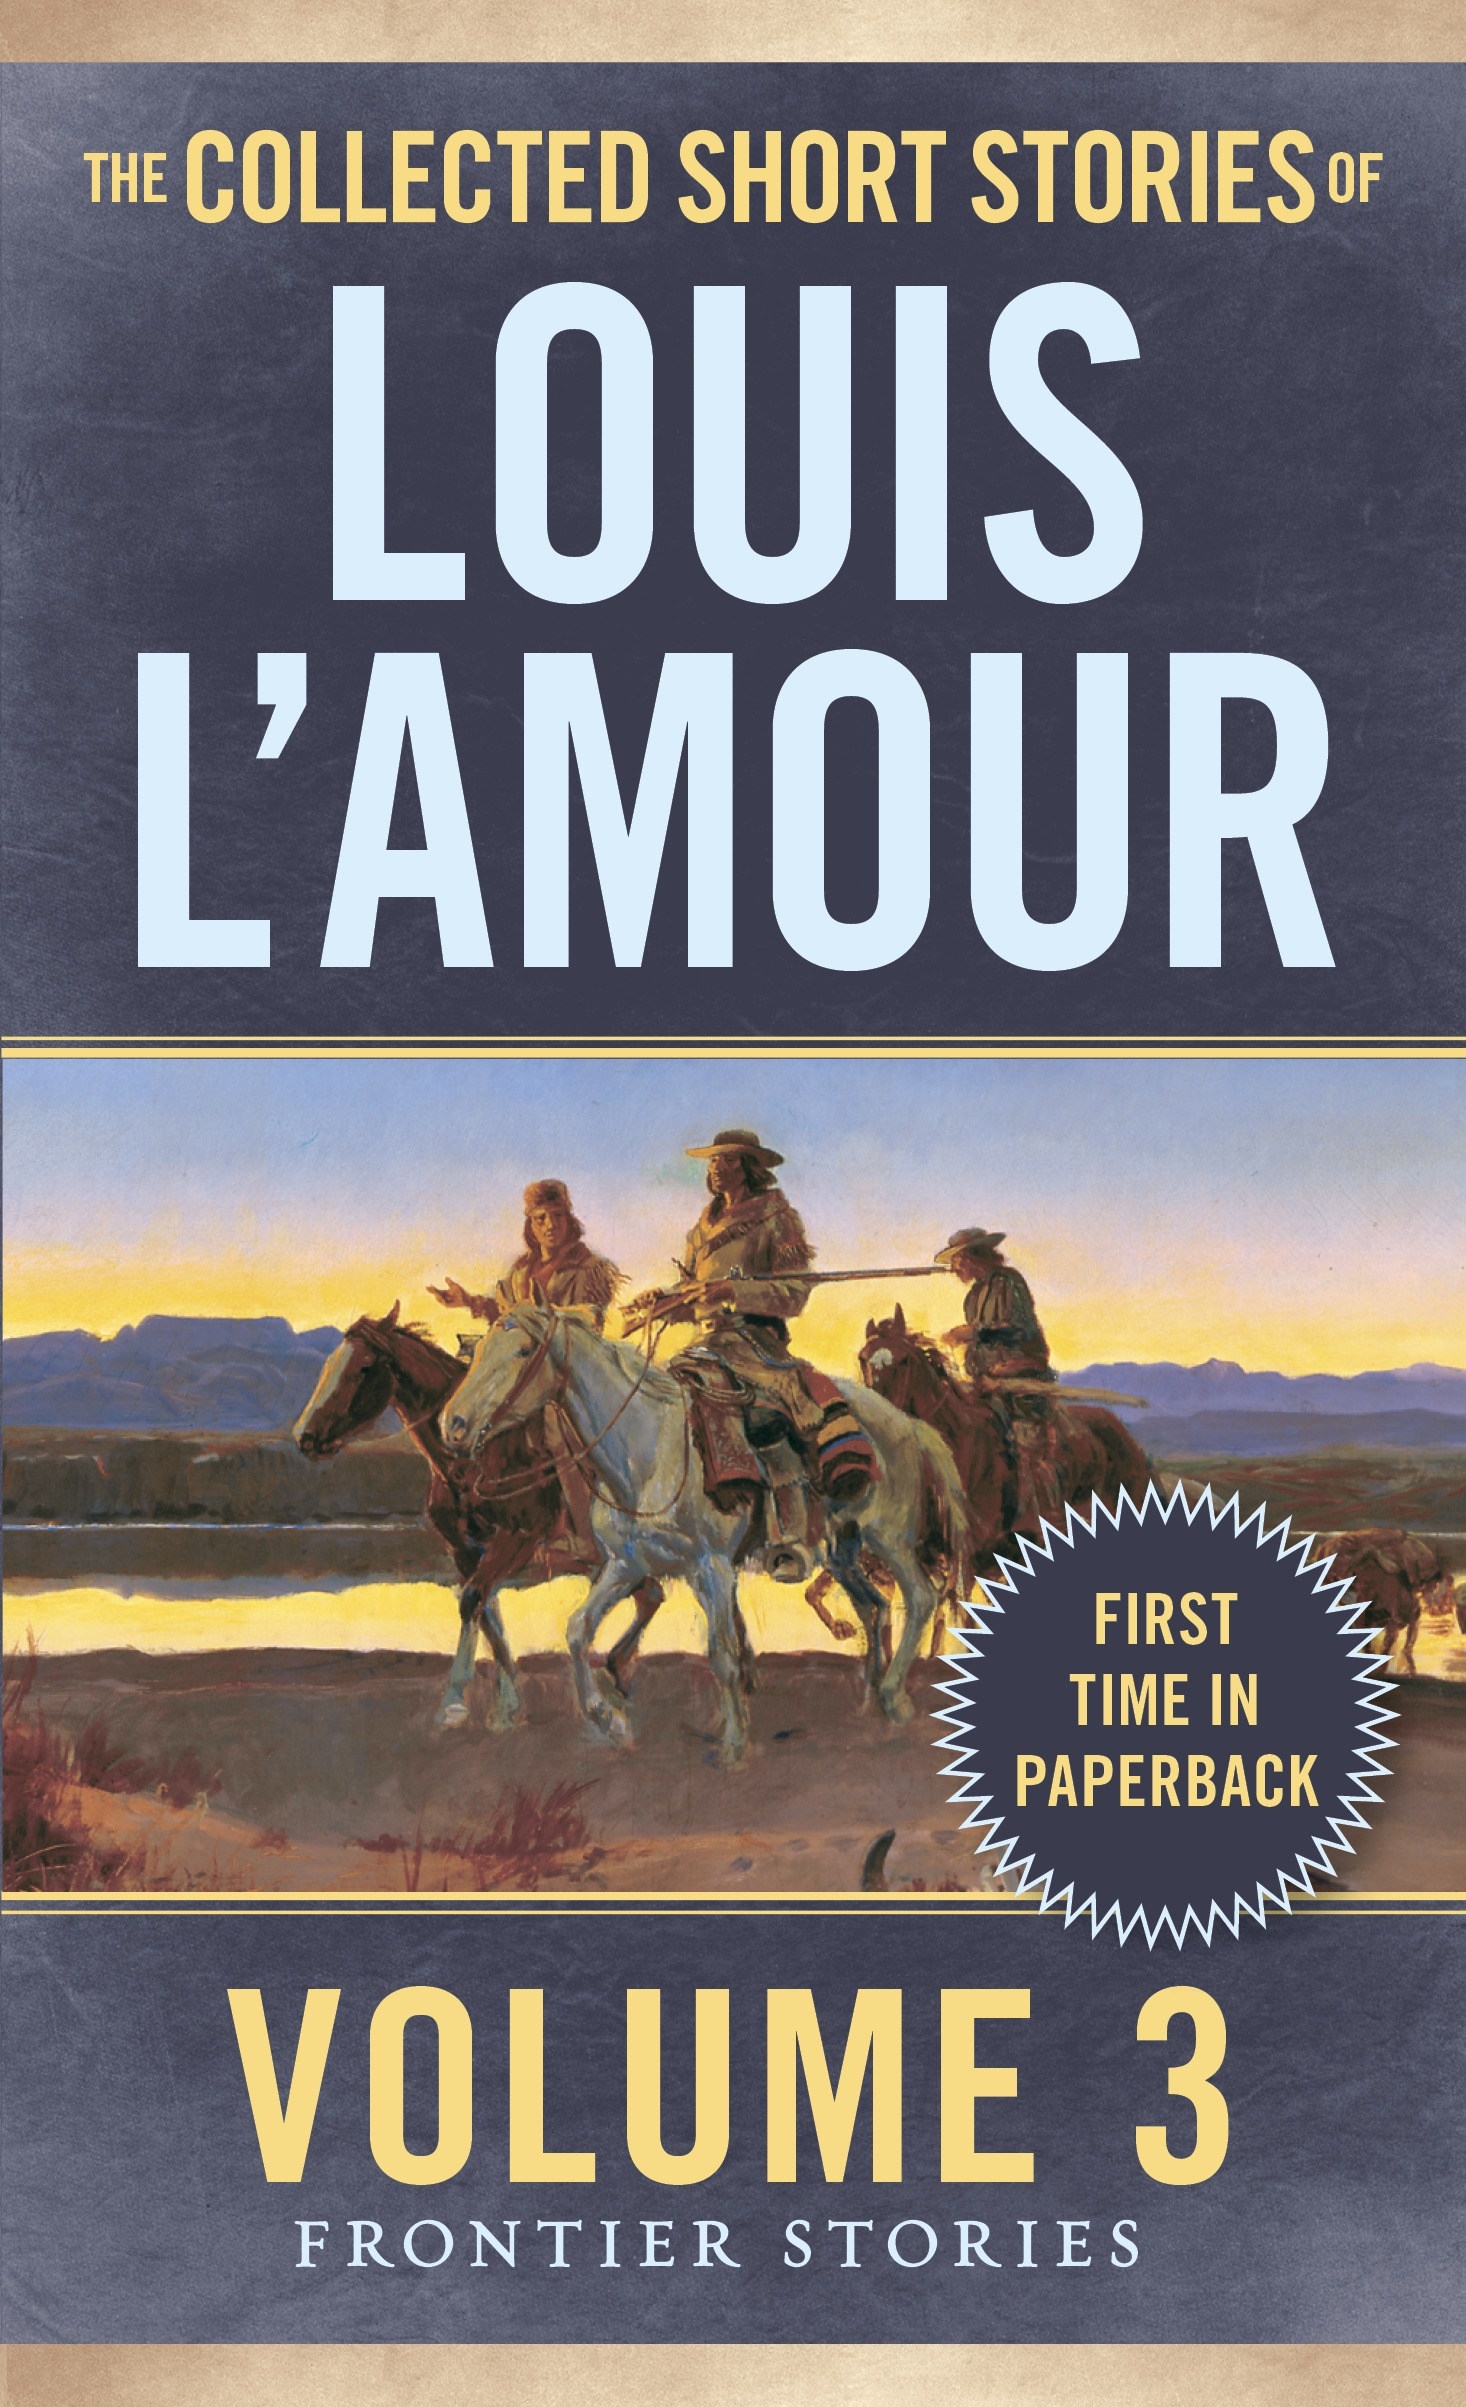 The Collected Short Stories of Louis L'Amour: The Crime Stories, Volume 6  (The Louis L'Amour Collection) (Louis L'Amour Leather Bound Series): Louis L 'Amour: 9780375426186: : Books